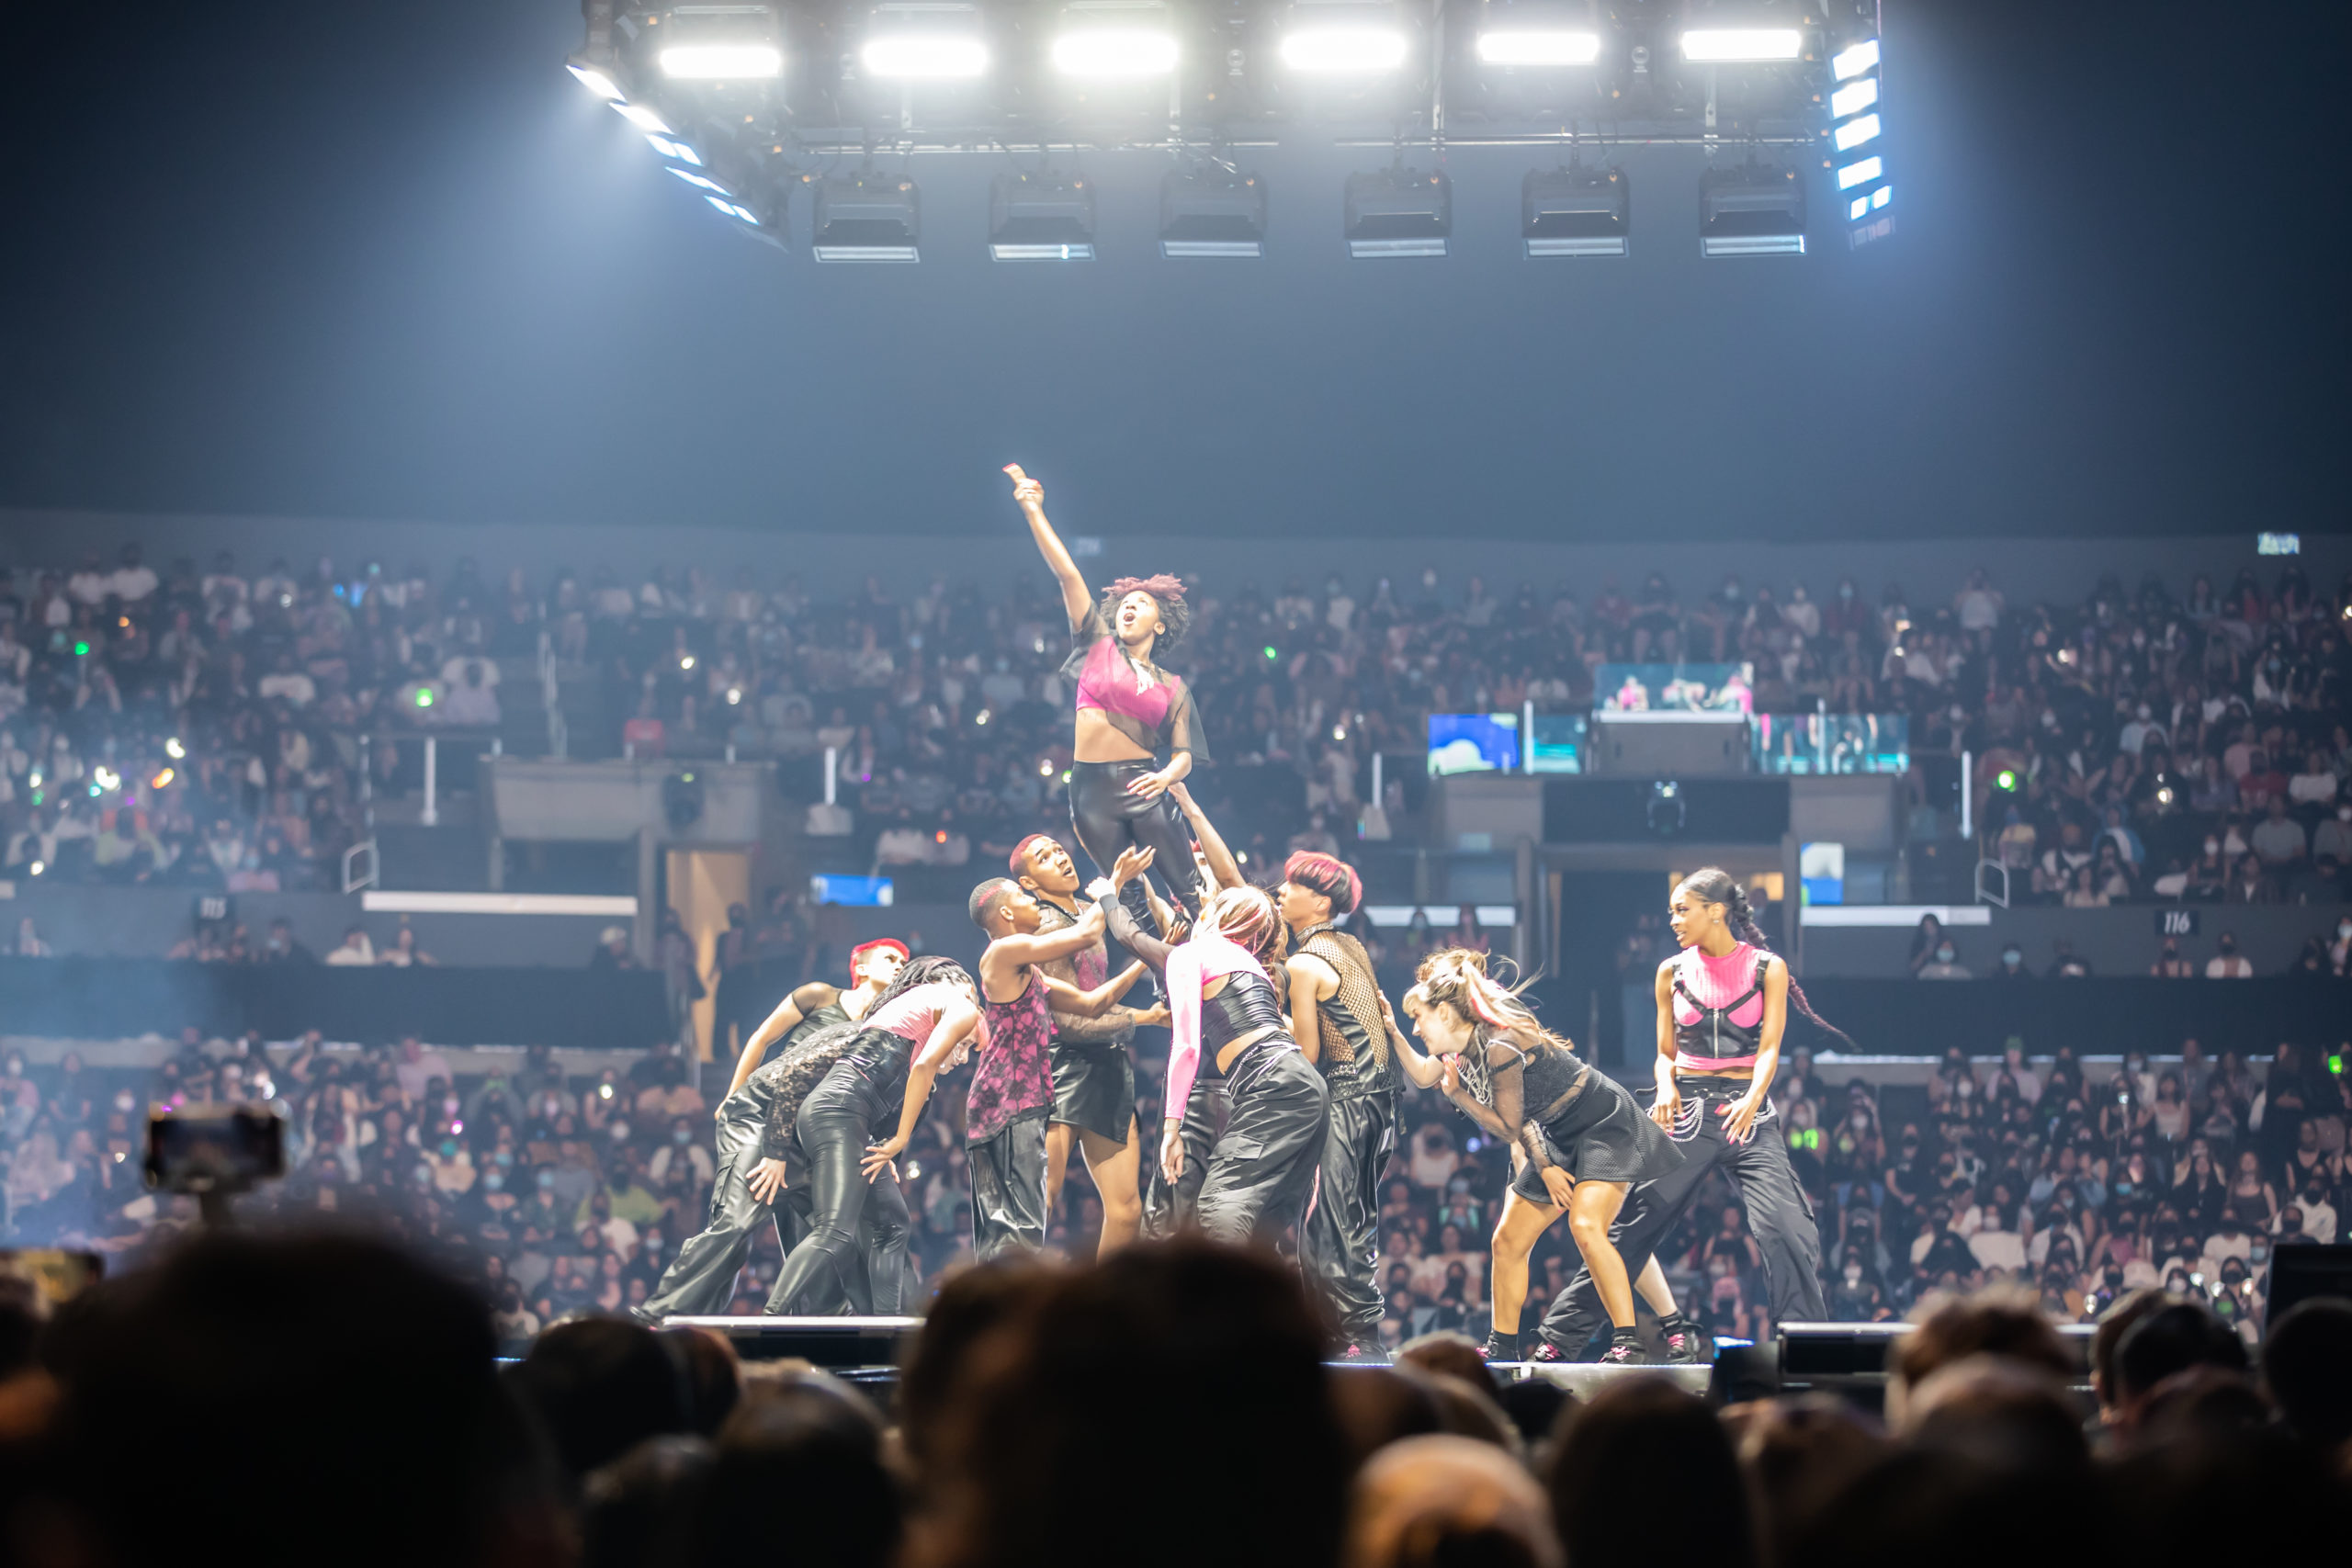 A group of dancers performing for a full stadium at L.A. KCON. One dancer is being held in the air by the others.